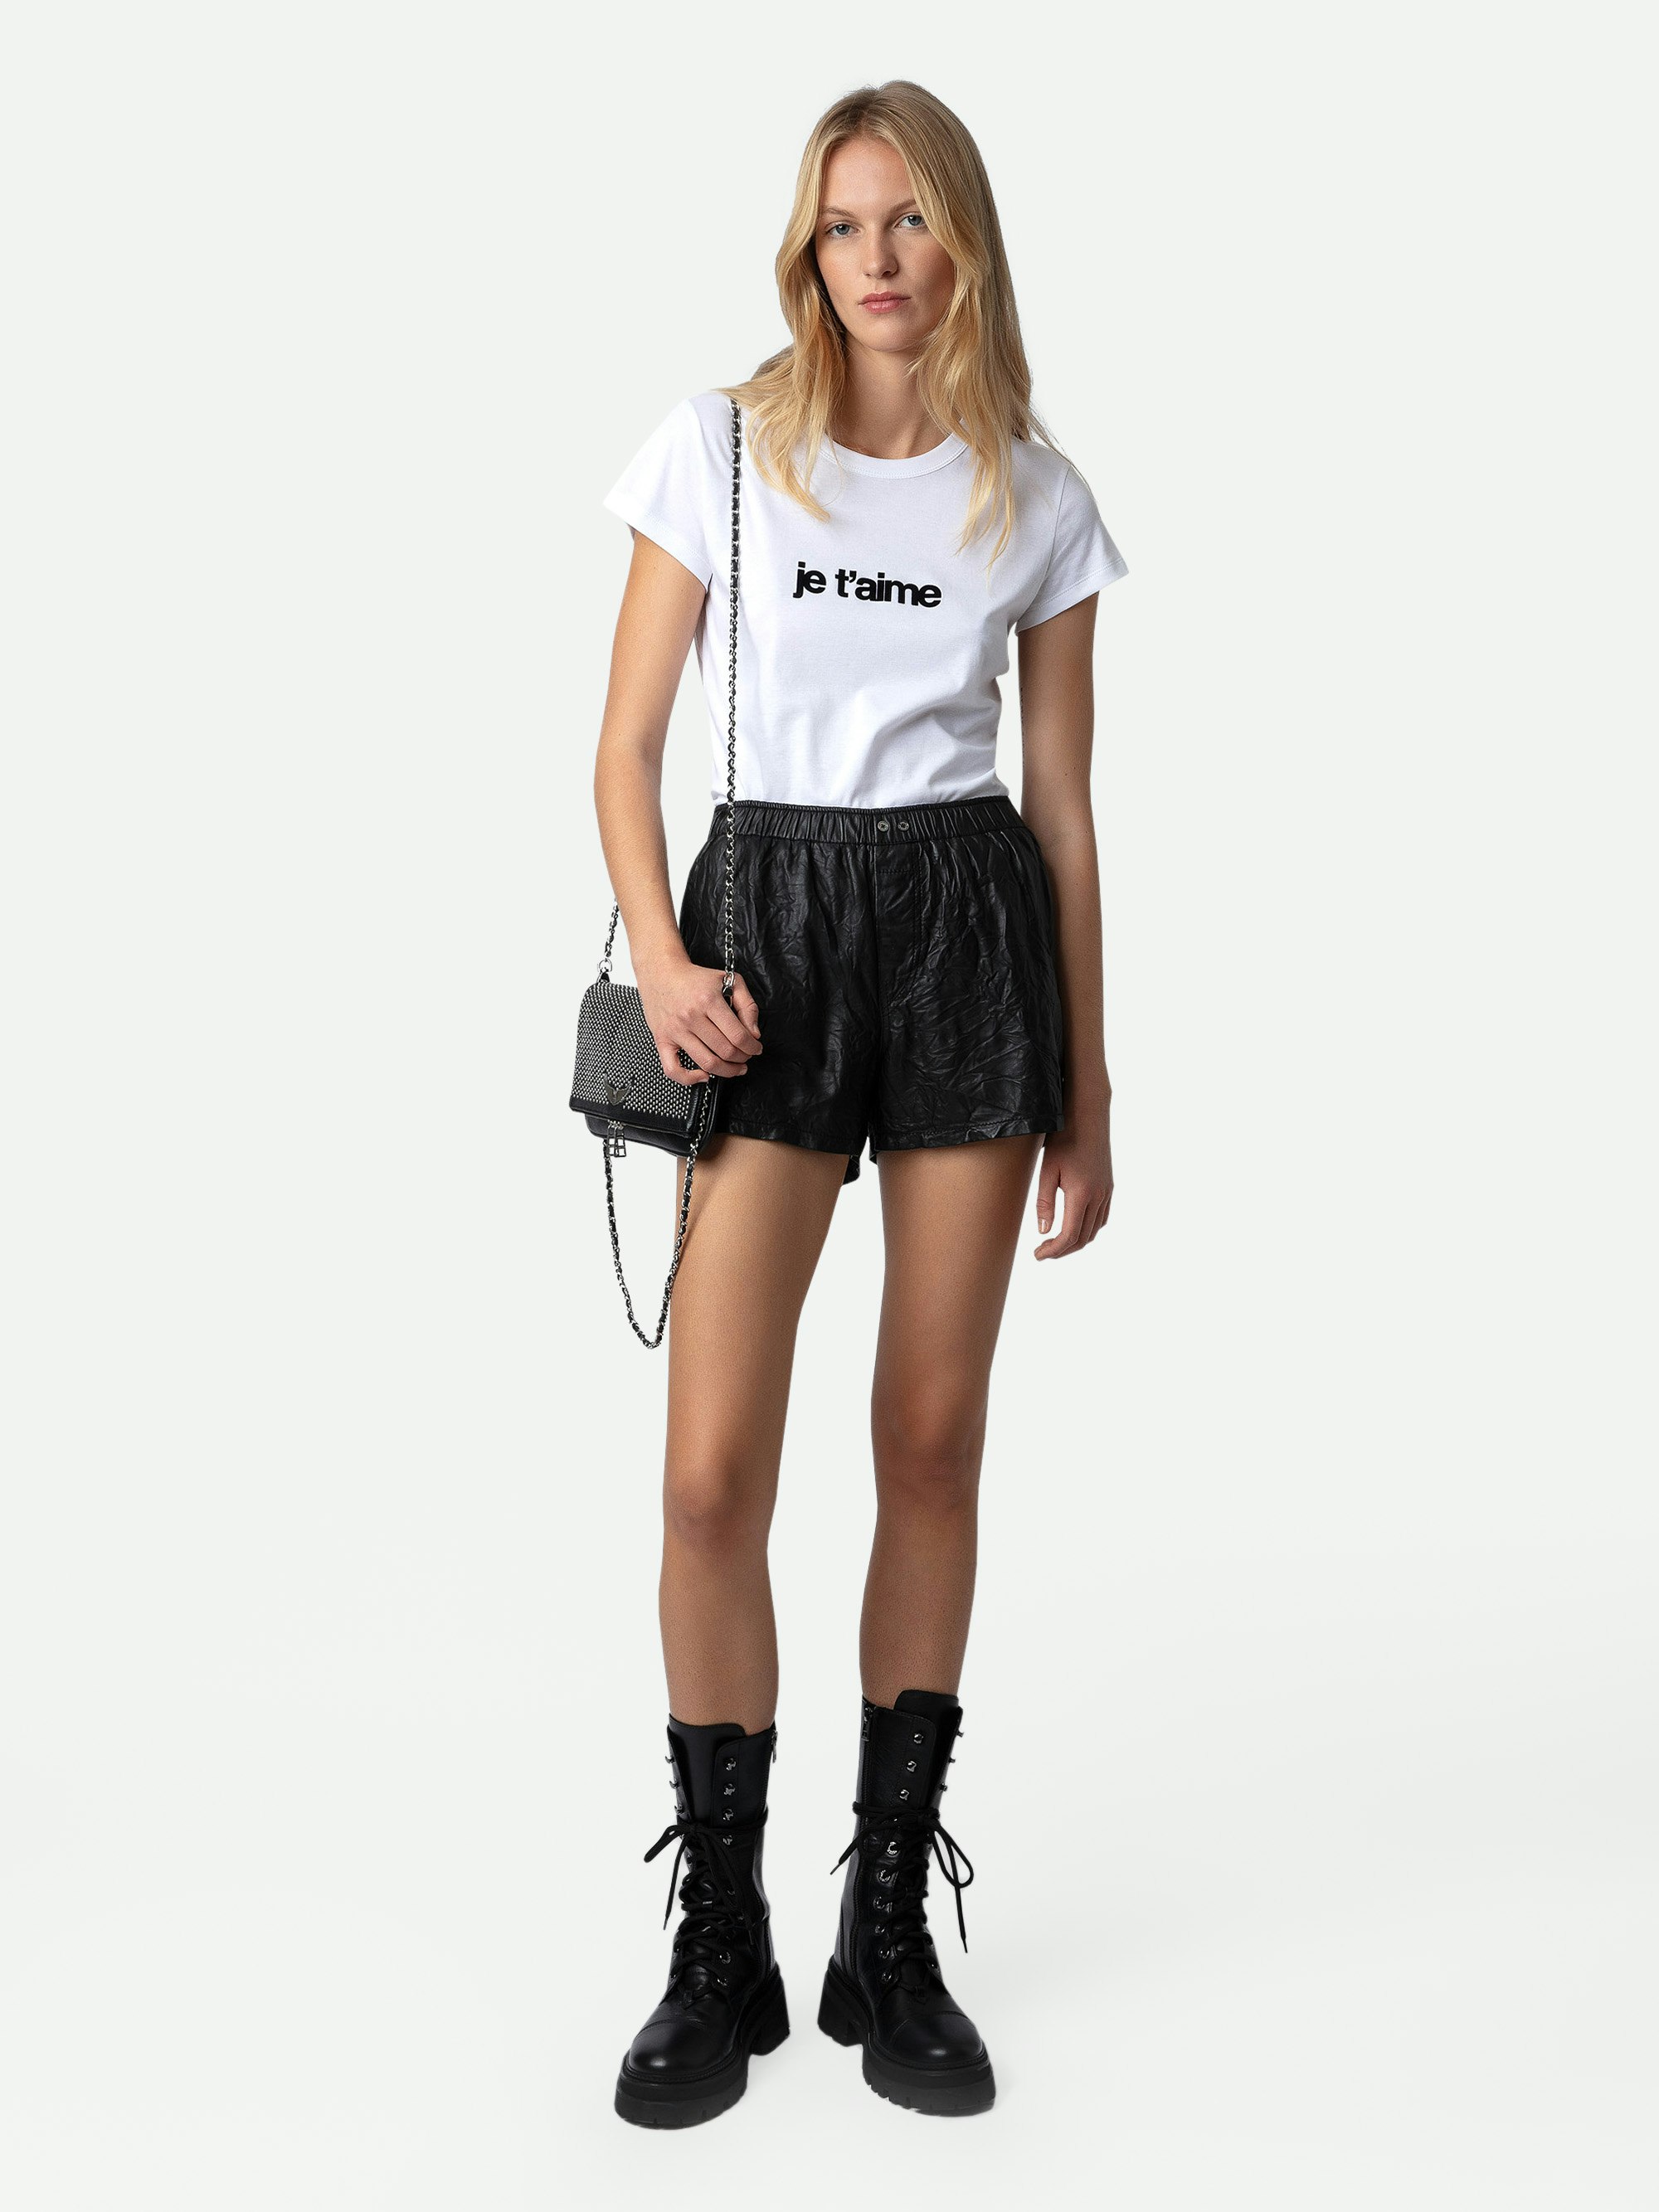 Woop Je T’aime T-shirt - White cotton round-neck T-shirt with short sleeves and flocked slogan.